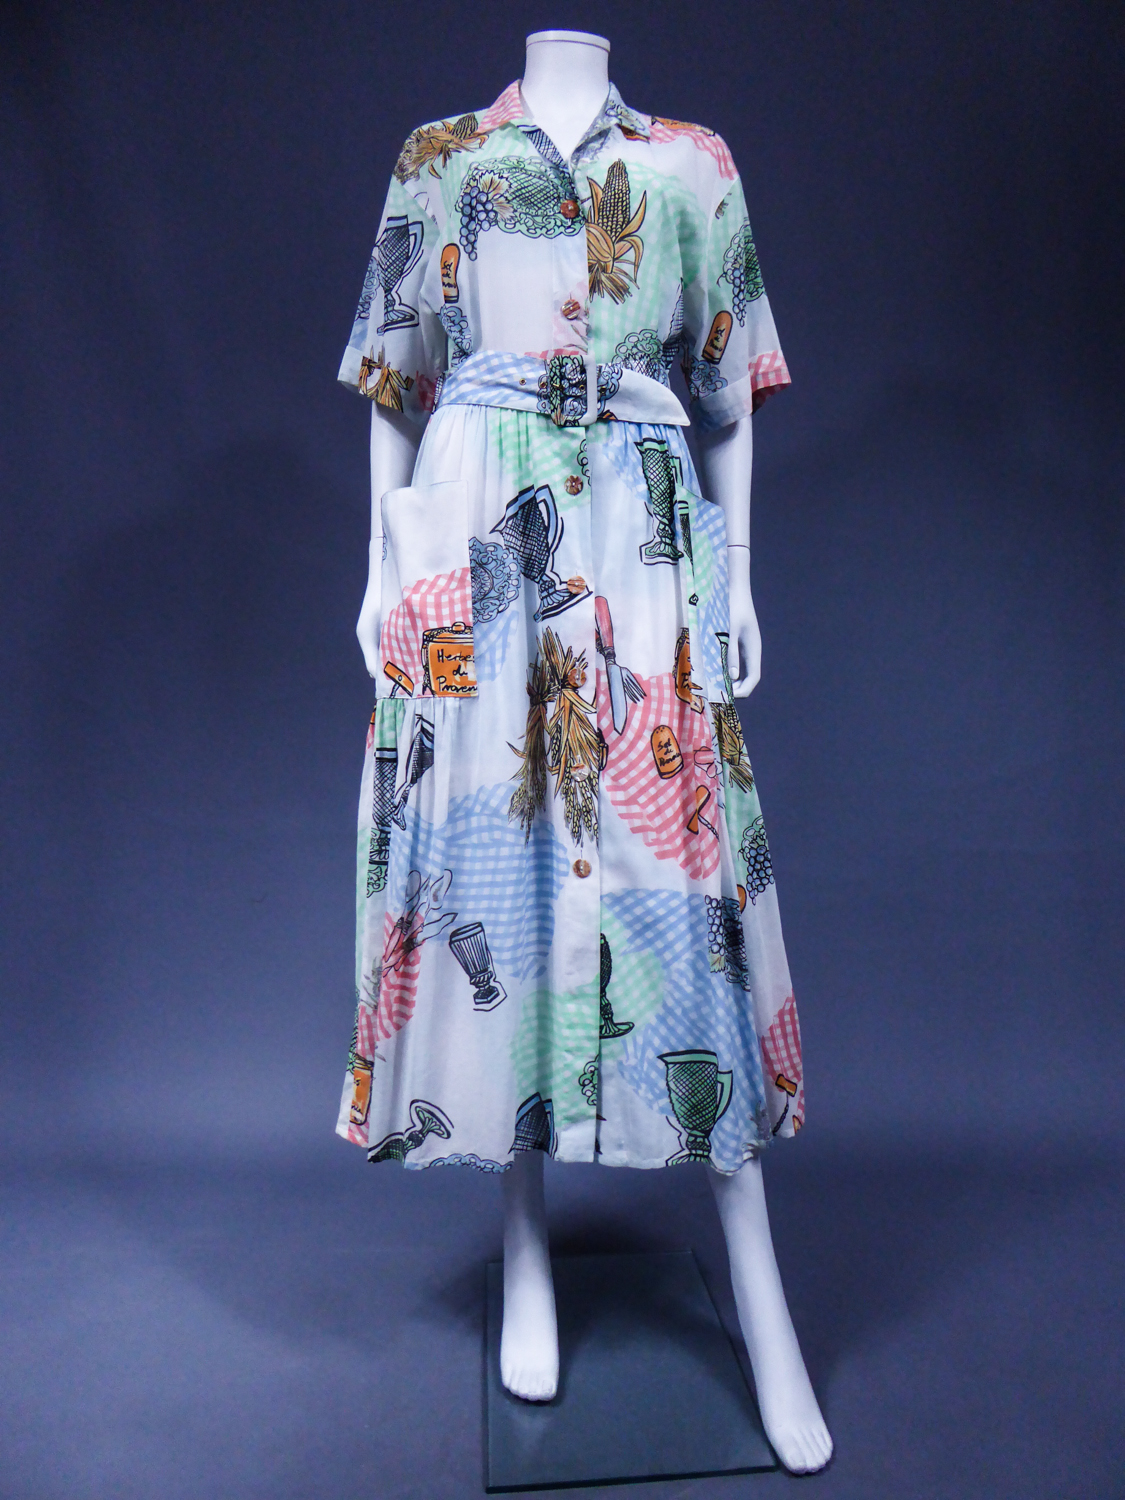 Louis Feraud 1960s Vintage Printed Silk Belted Dress Size 40 / 4 Small Blues